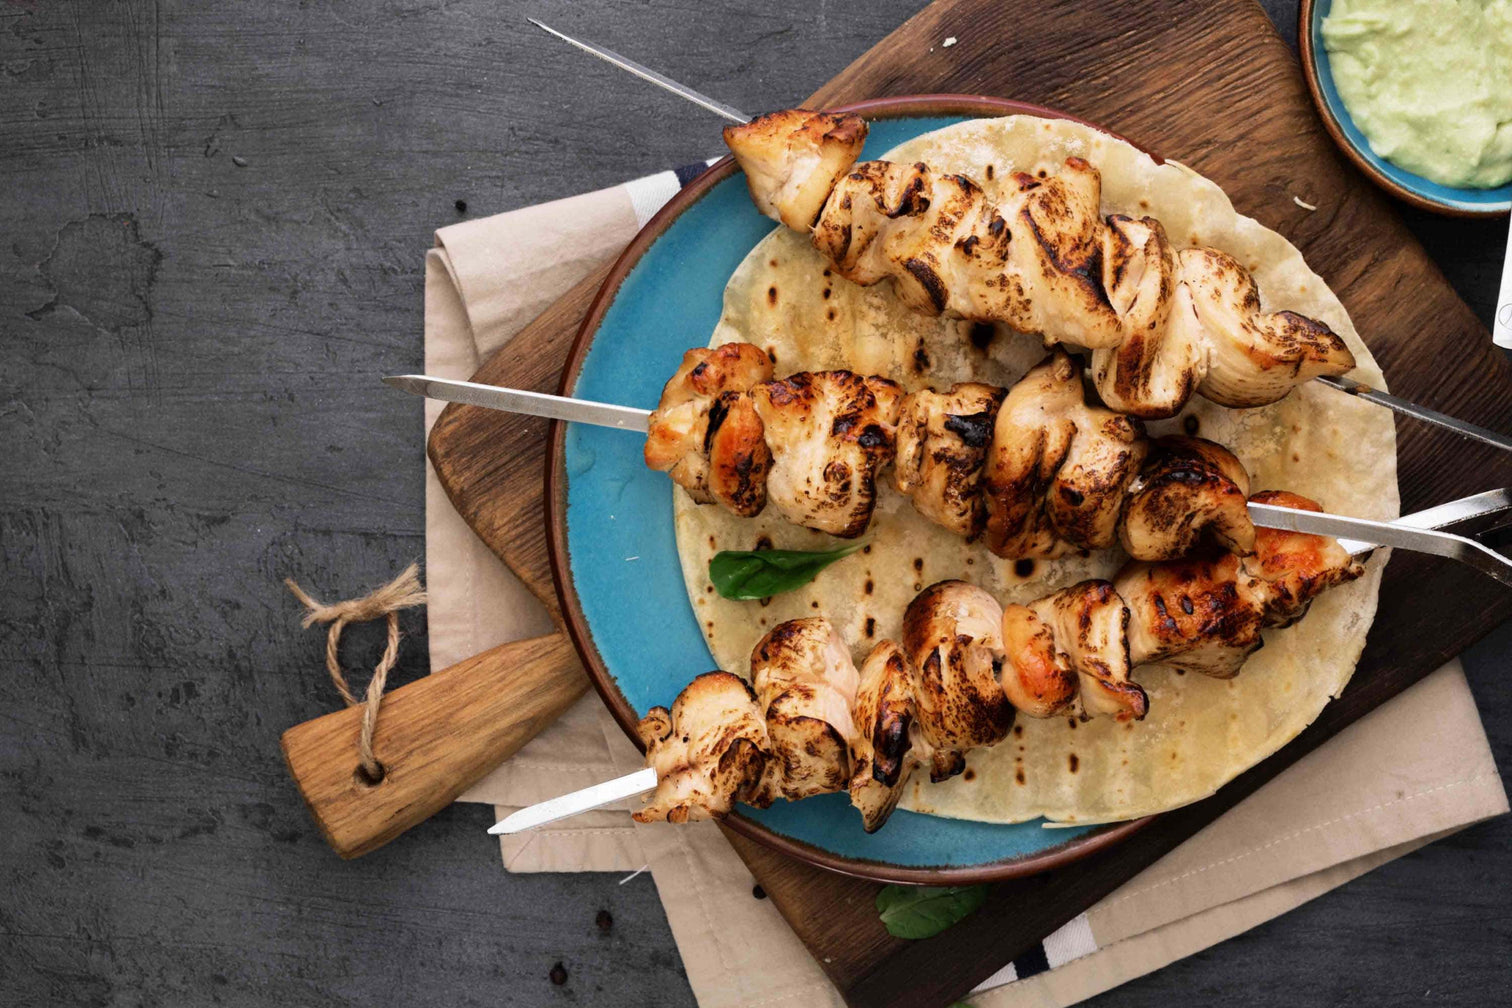 Grilled chicken skewers with piquant spices served on flatbread